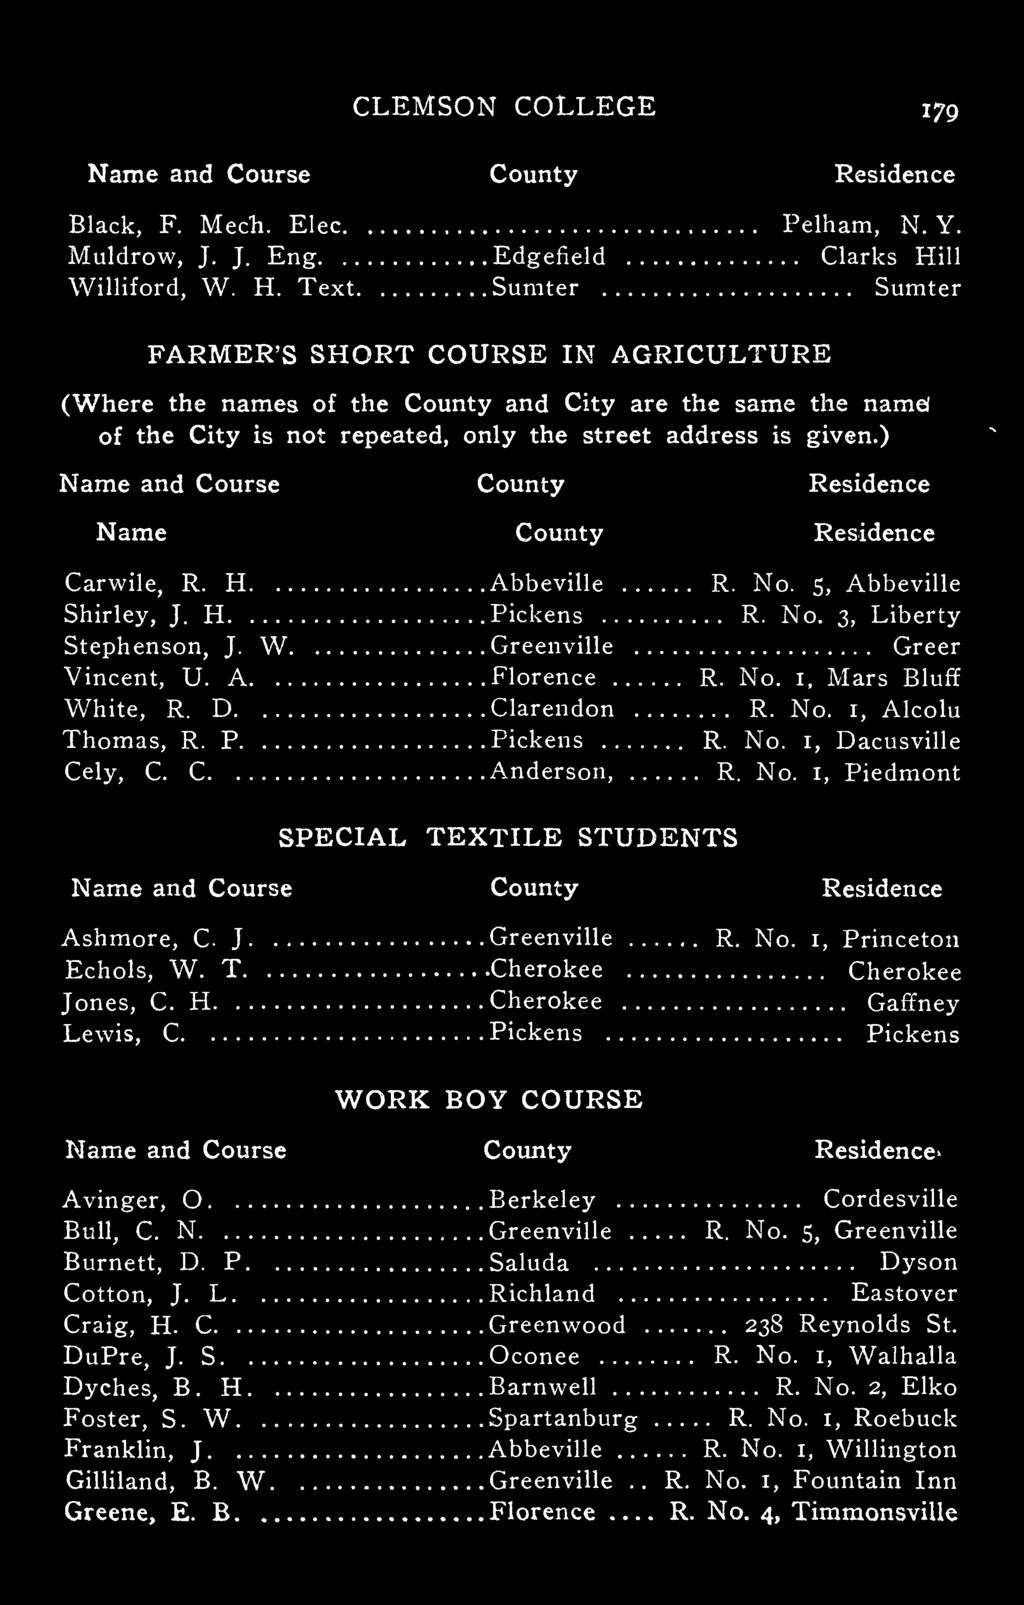 Text Sumter Sumter FARMER'S SHORT COURSE IN AGRICULTURE (Where the names of the County and City are the same the namel of the City is not repeated, only the street address is given.